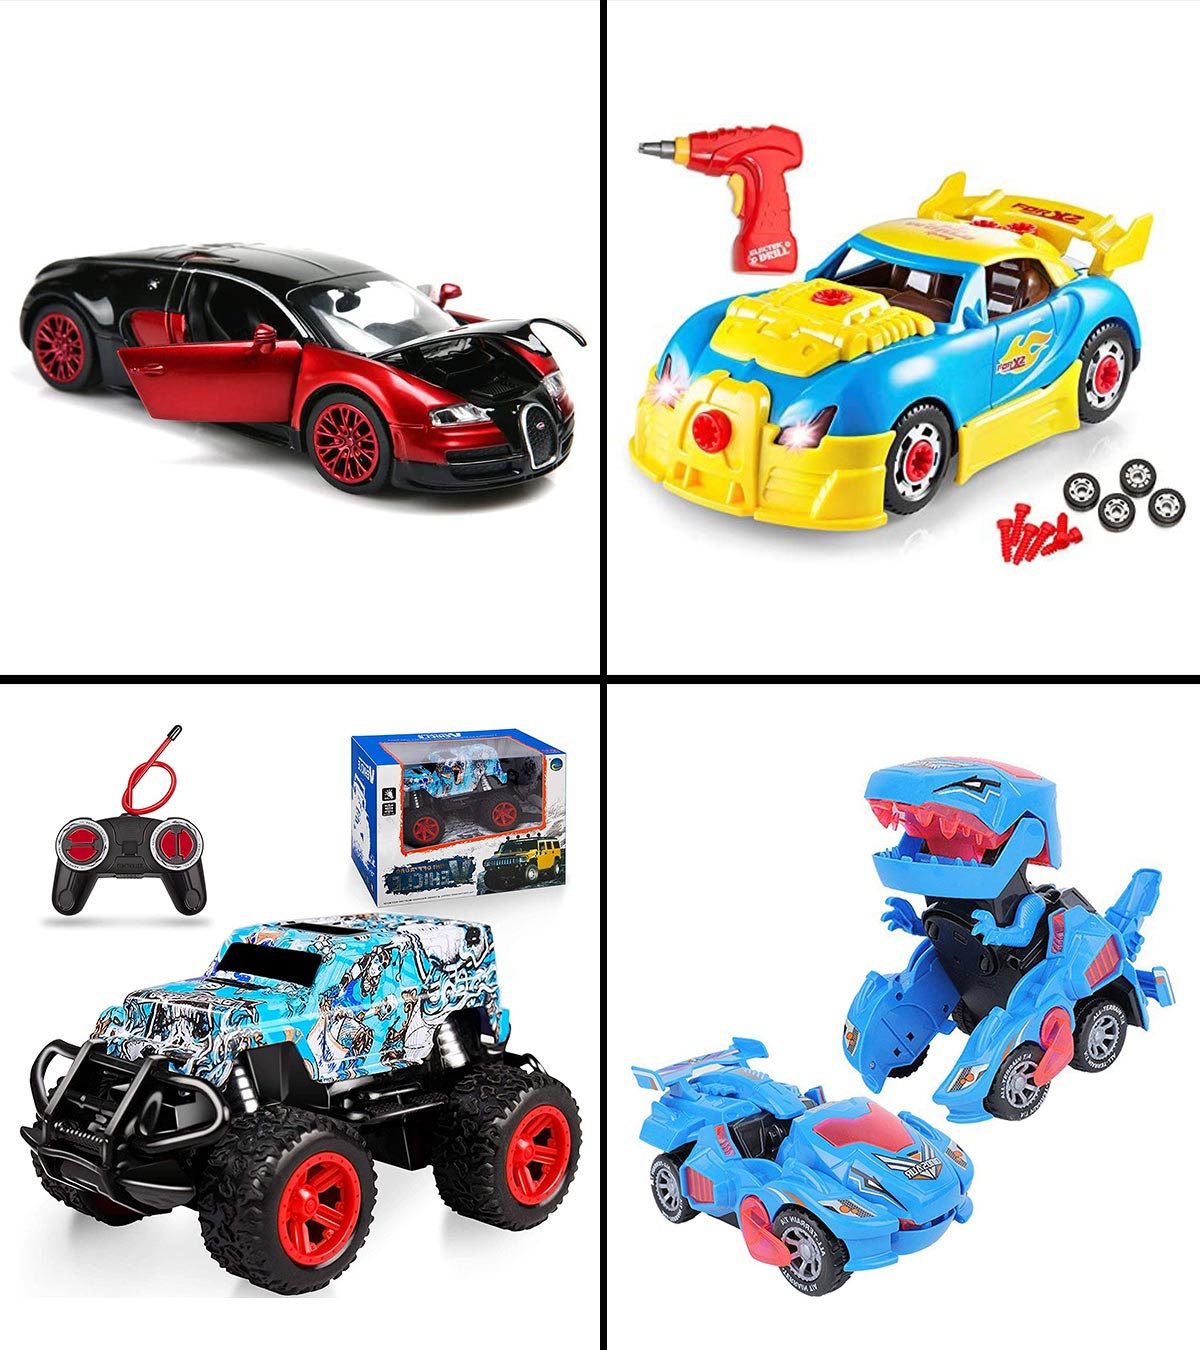 11Best Toy Cars For 5-Year-Old Kids